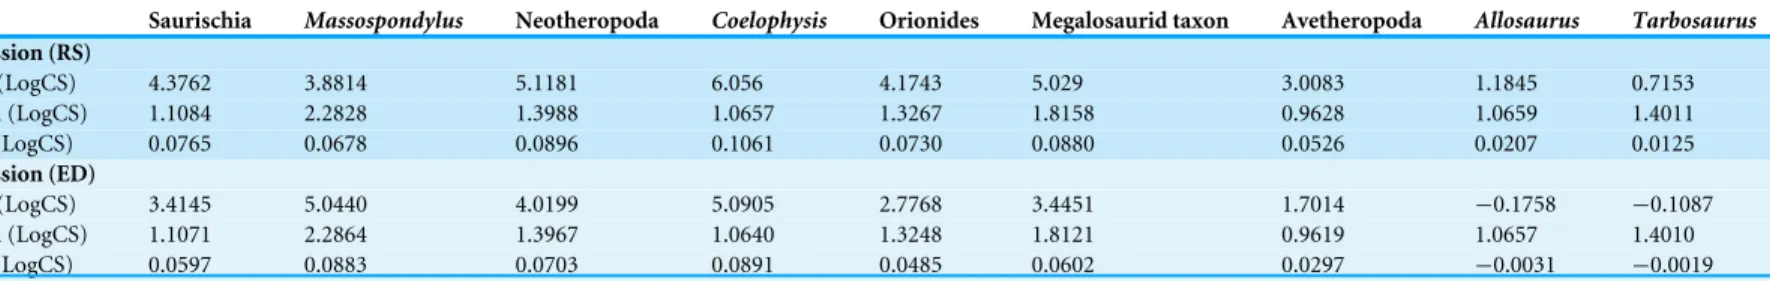 Table 3 Angles and lengths of terminal and ancestral ontogenetic trajectories. Angles, lengths and slopes of ontogenetic trajectories from the regression of shape (Re- (Re-gression score, RS and Euclidean Distance, ED) versus log-transformed centroid size 